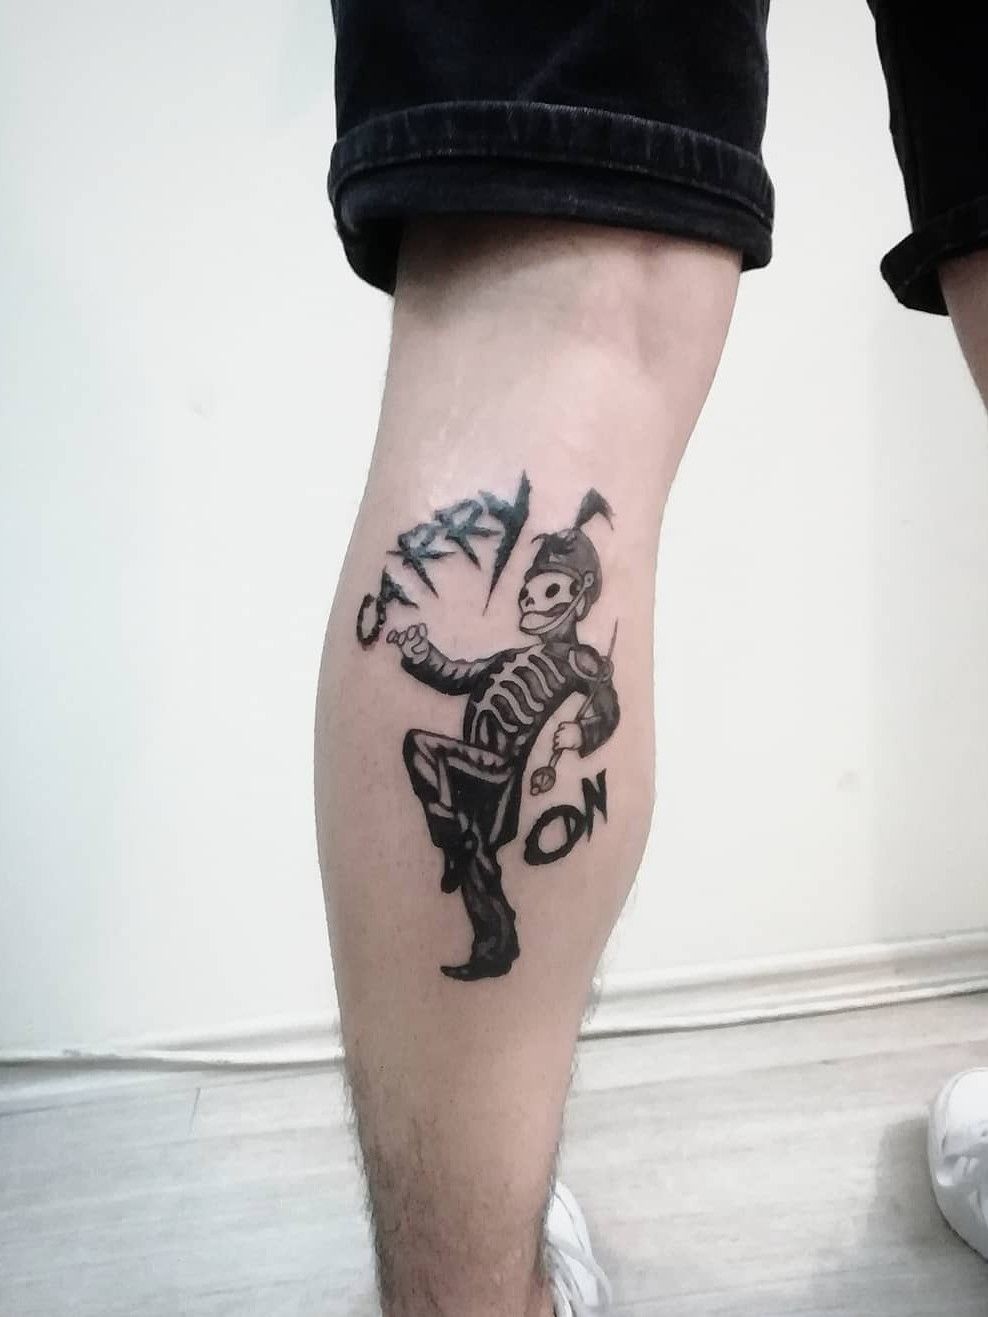 Got this Tattoo last week and love it Youre gonna carry that weight   rcowboybebop